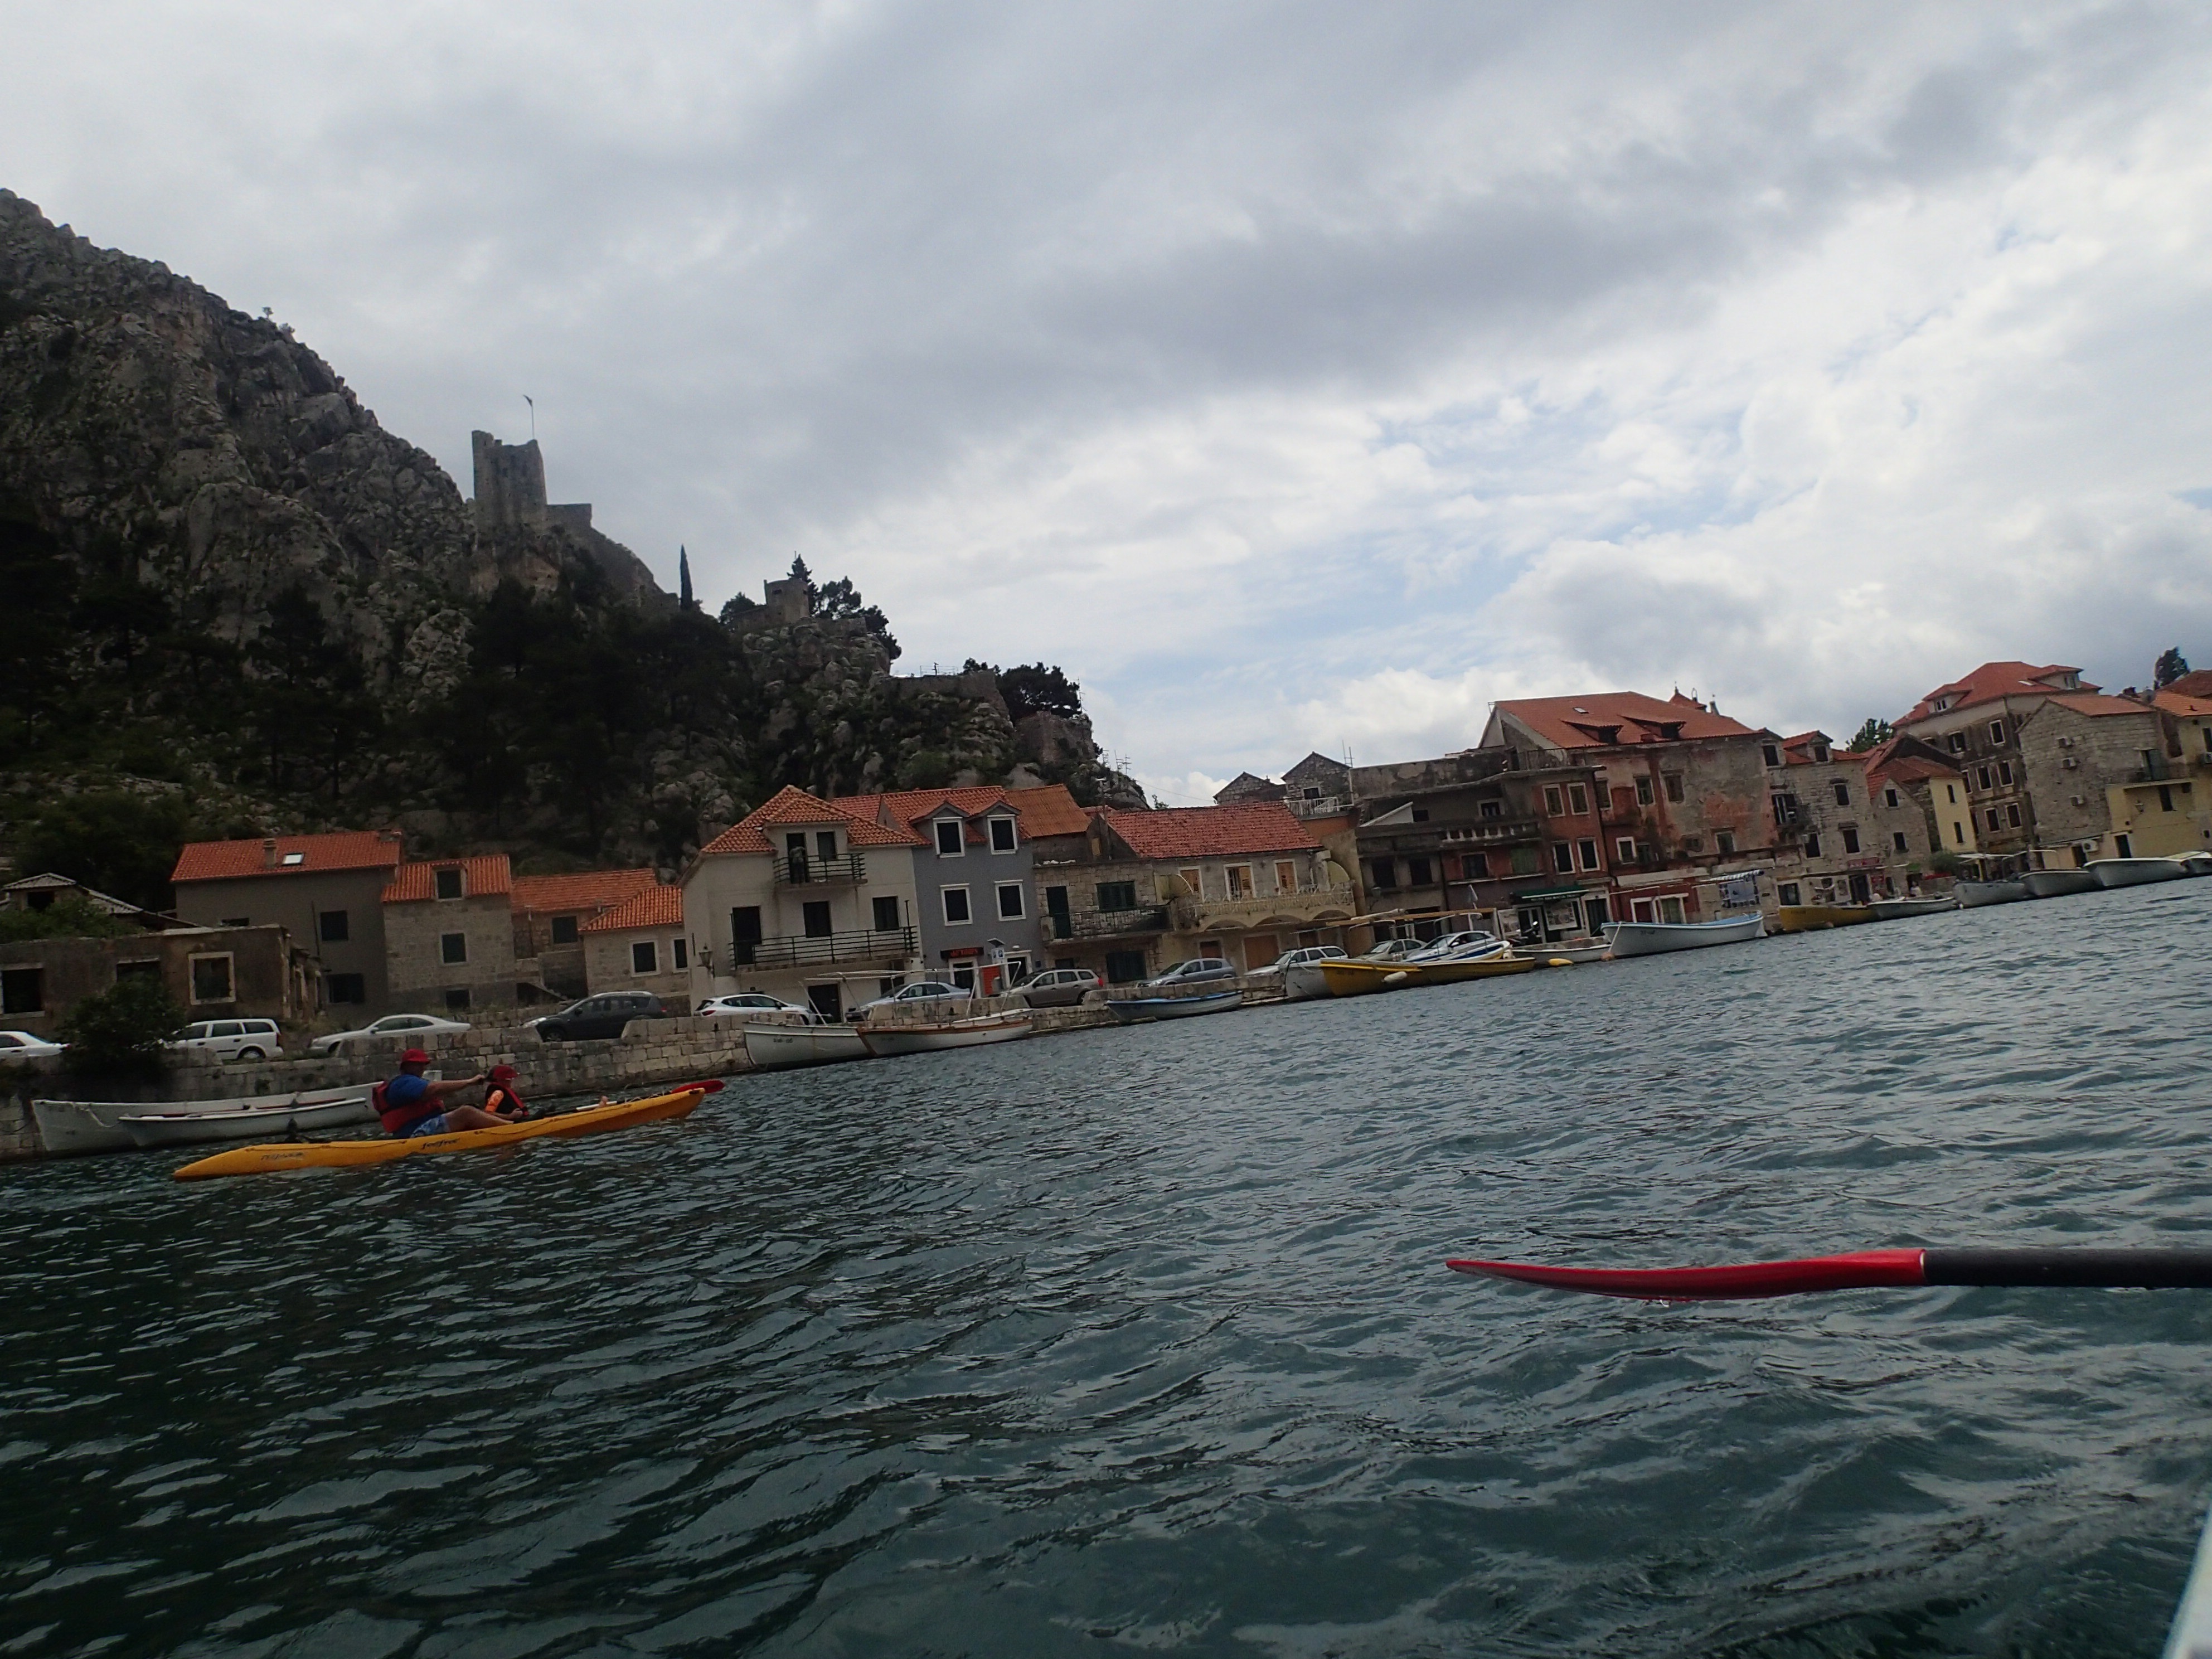 Kayaking from the river to the Sea